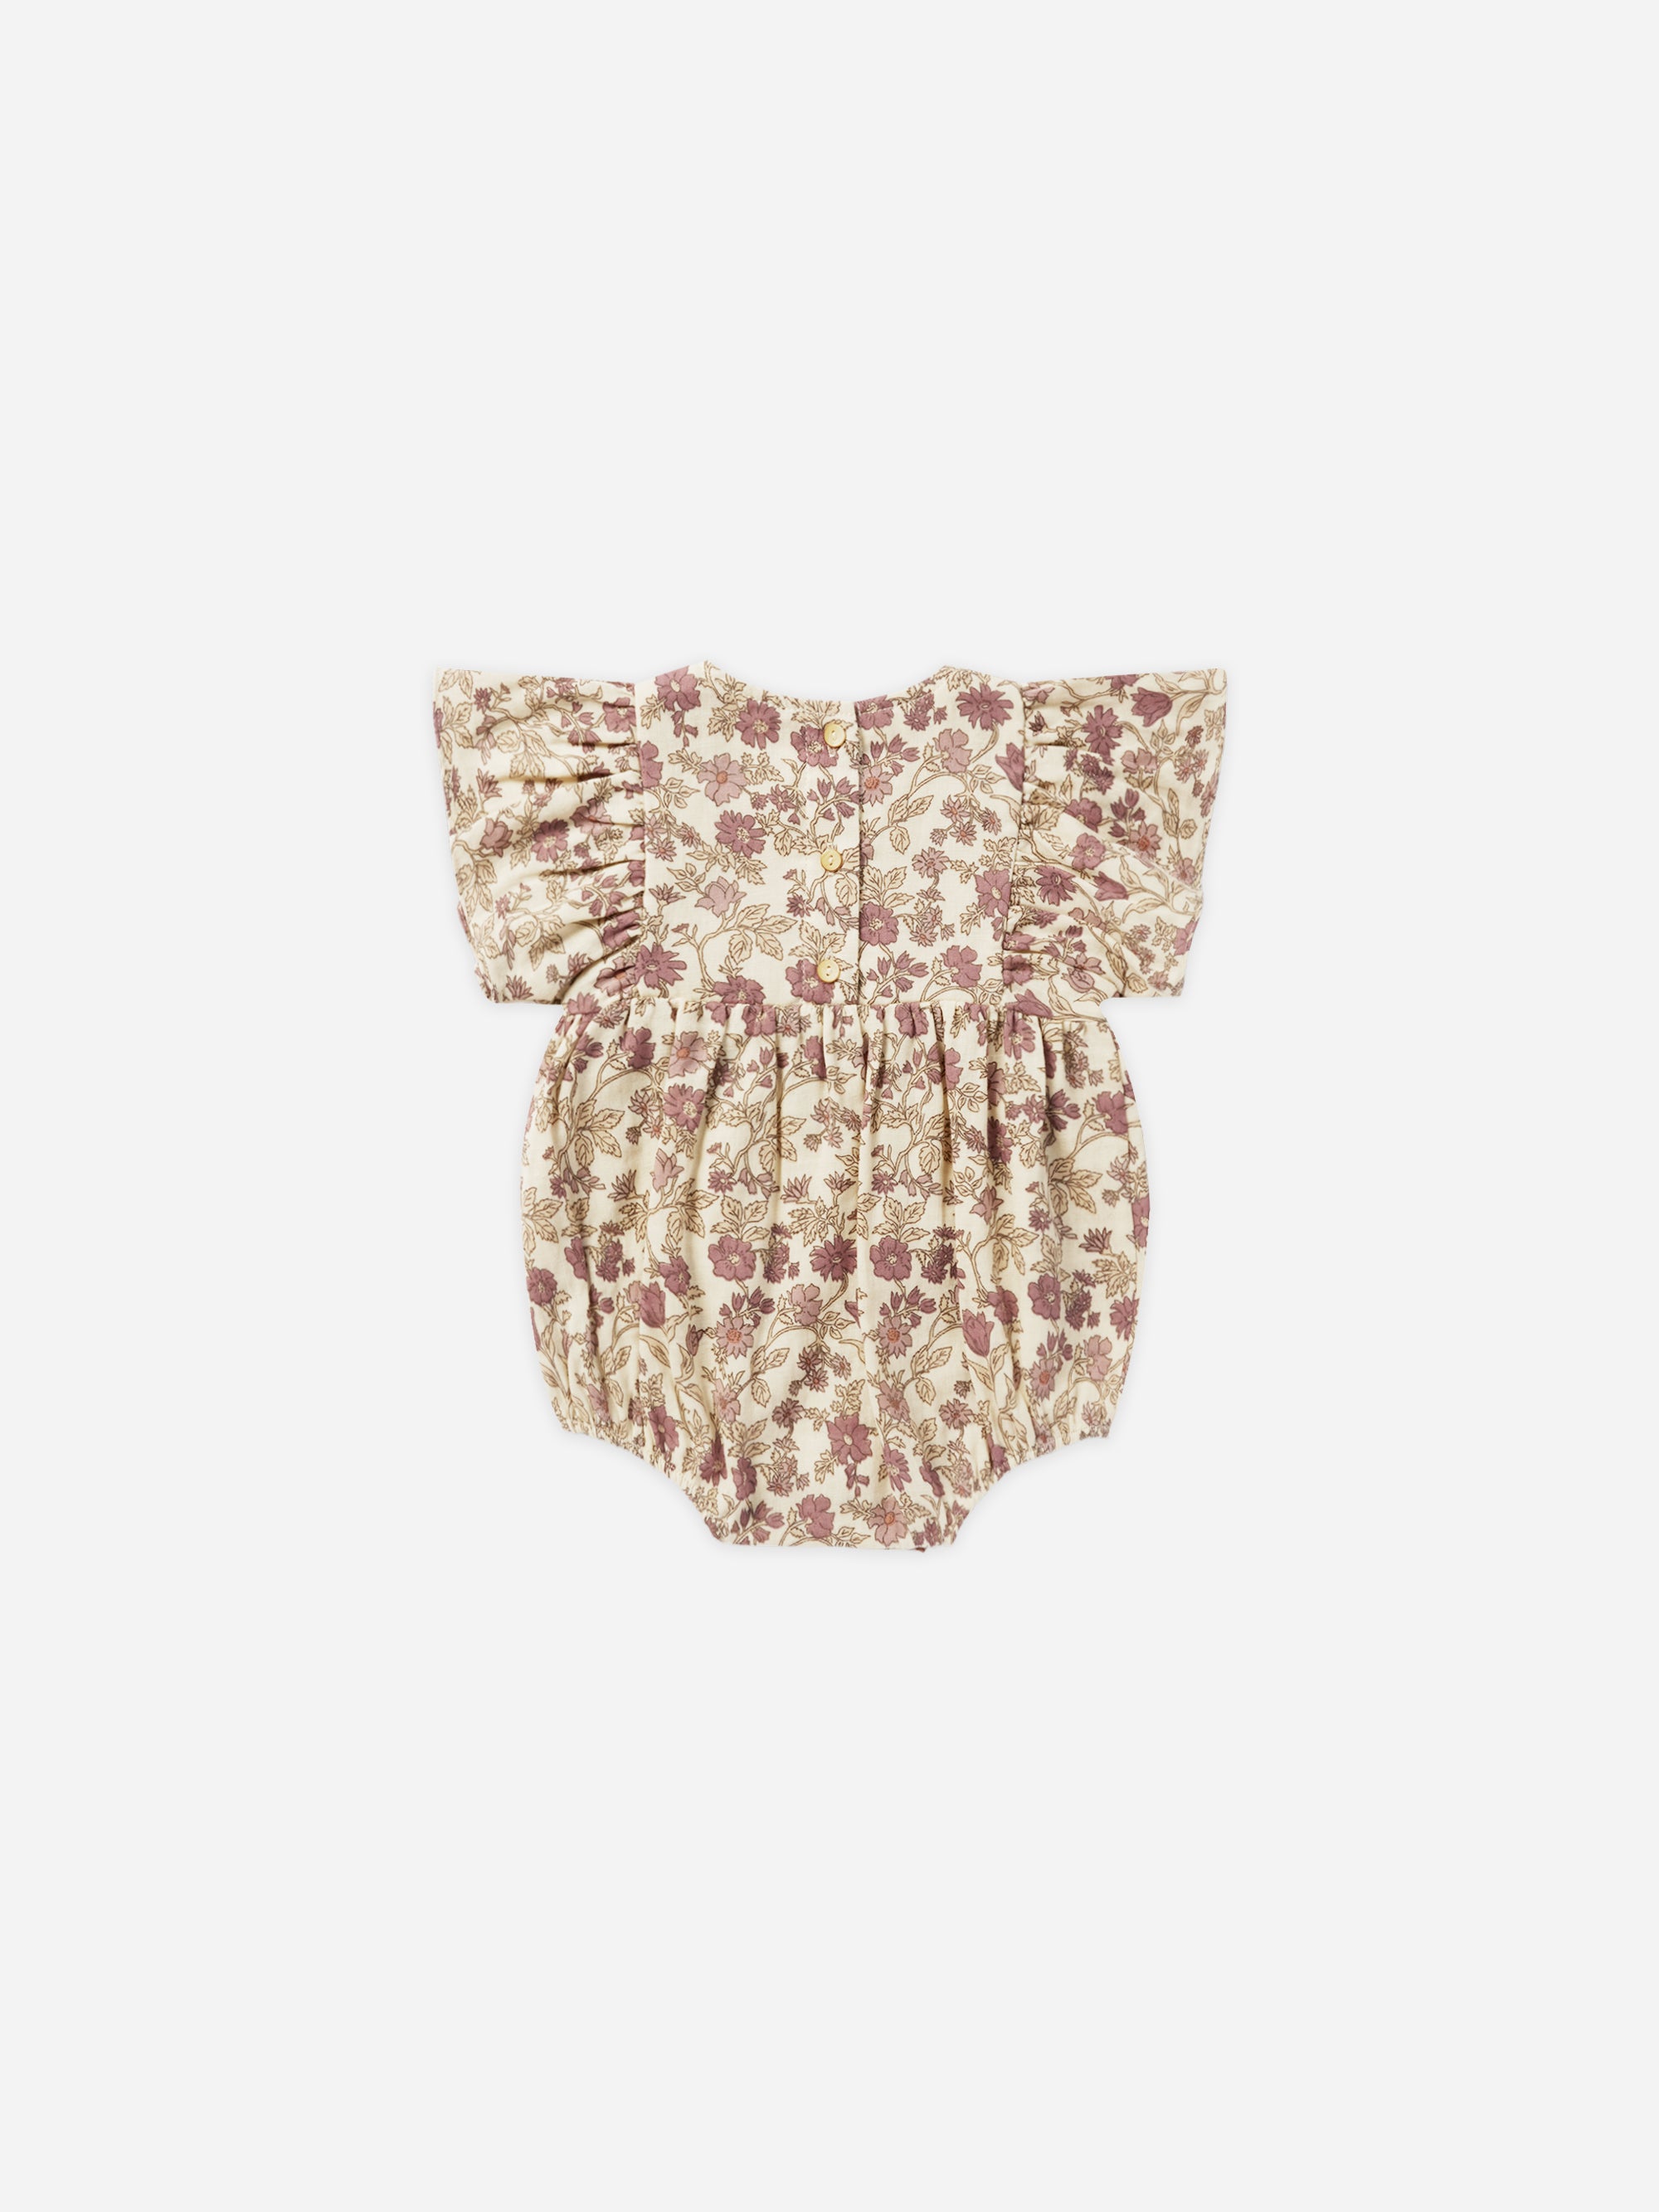 Kalea Romper || Bloom - Rylee + Cru | Kids Clothes | Trendy Baby Clothes | Modern Infant Outfits |